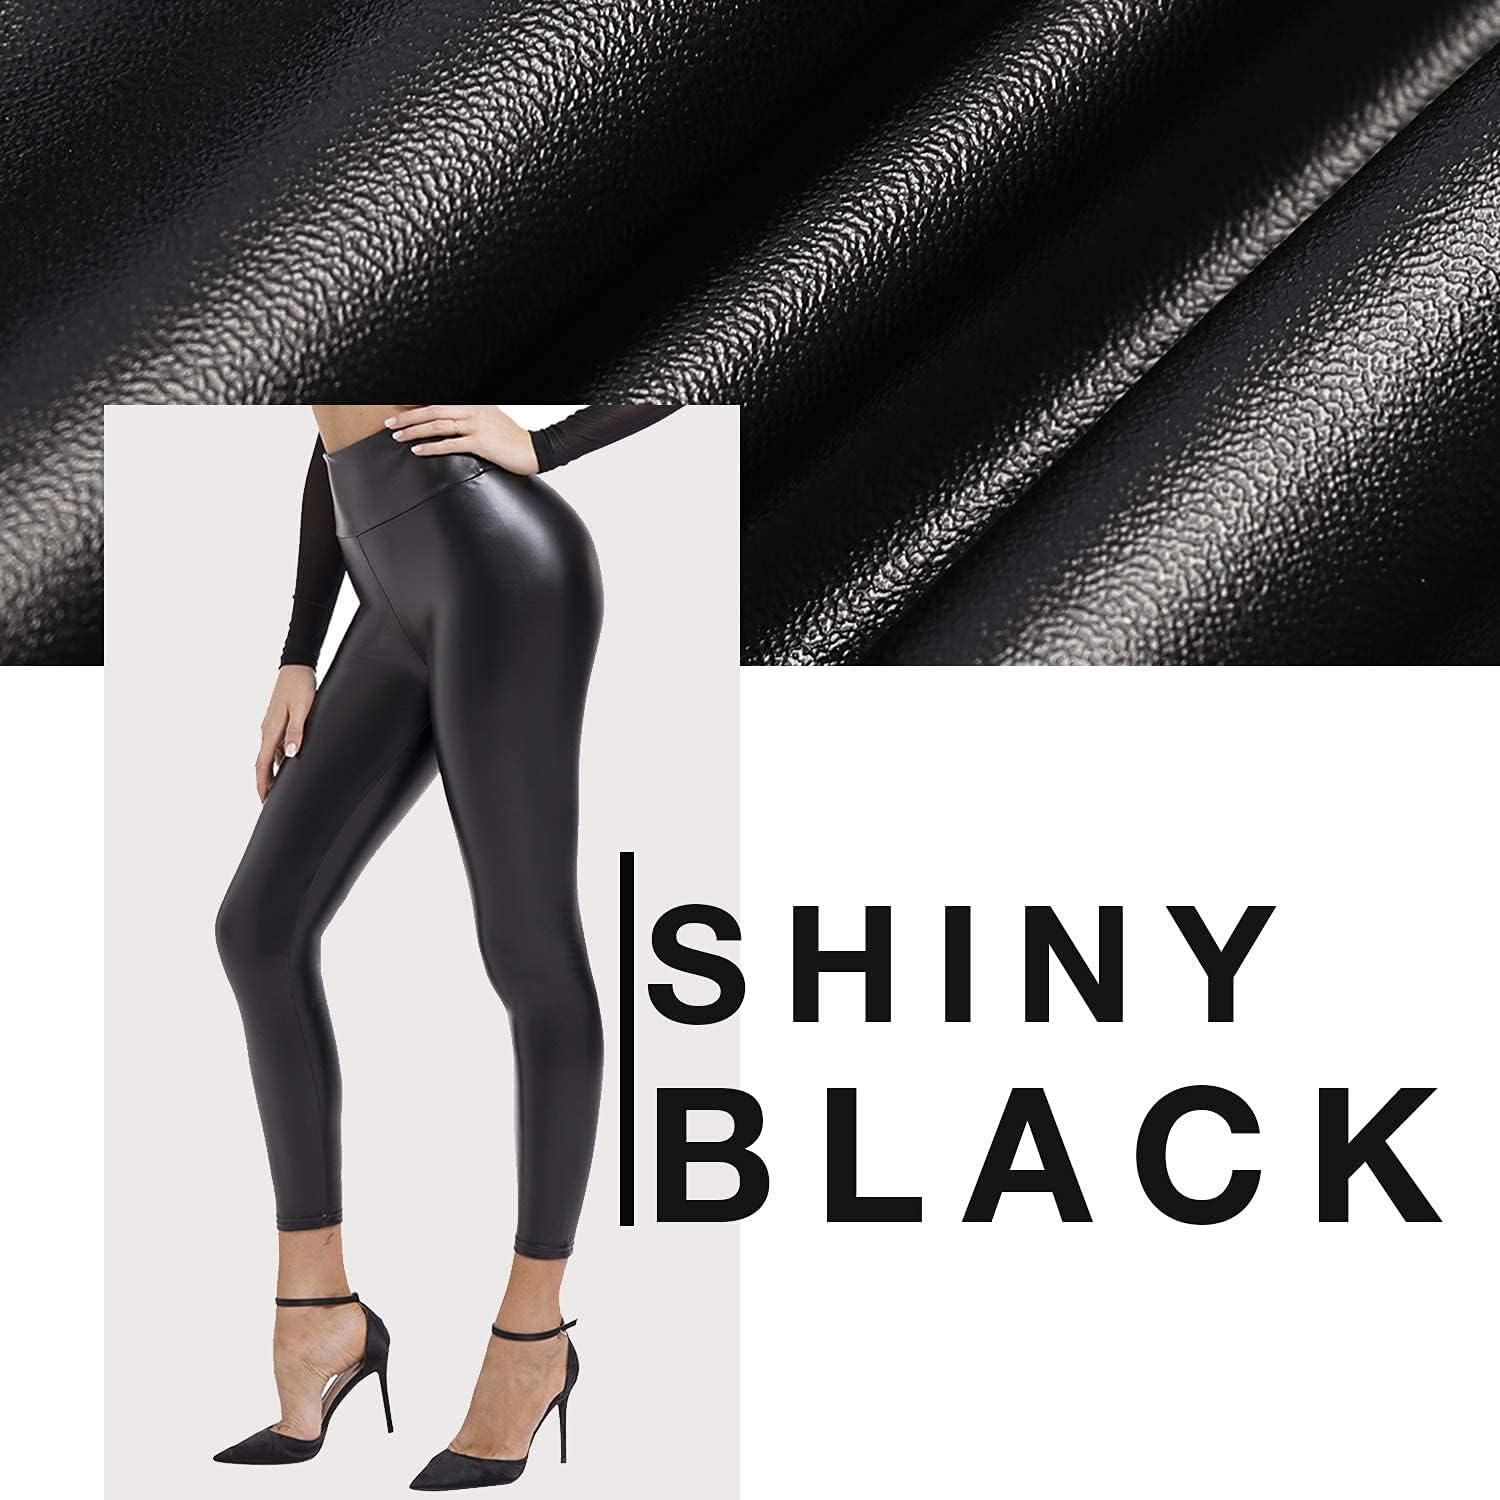 BOOTY GAL Faux Leather Leggings for Women High Waist Pants Black Elastic Tights